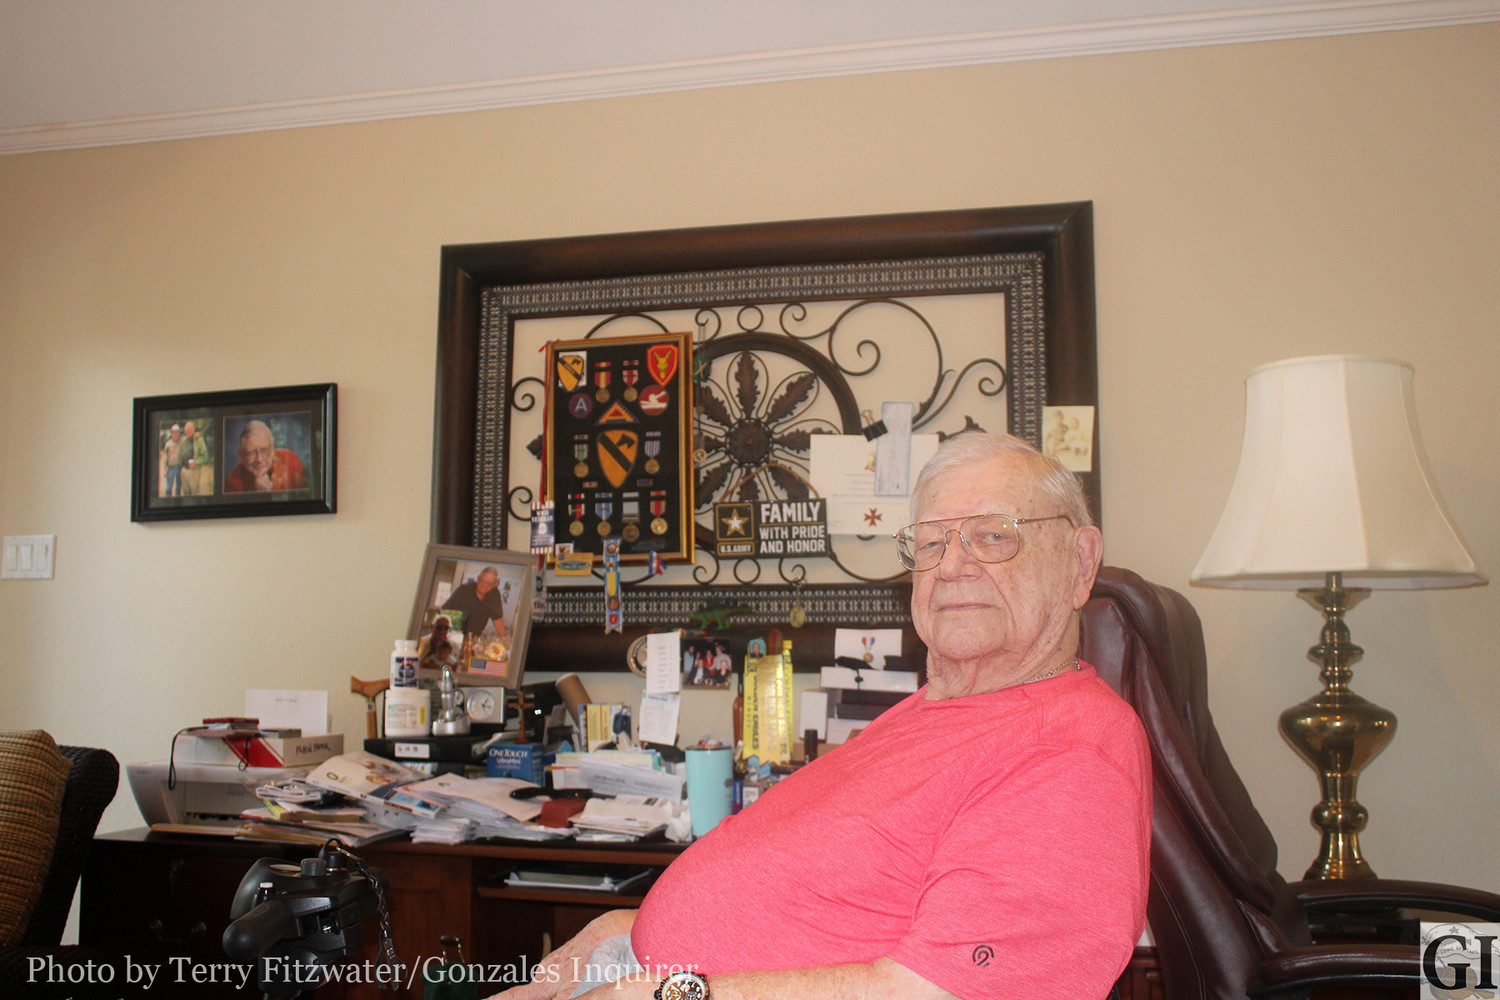 The life story of Bob Young has many different chapters from his military service during World War II and the Korean War to his civilian life where he eventually landed in Gonzales.